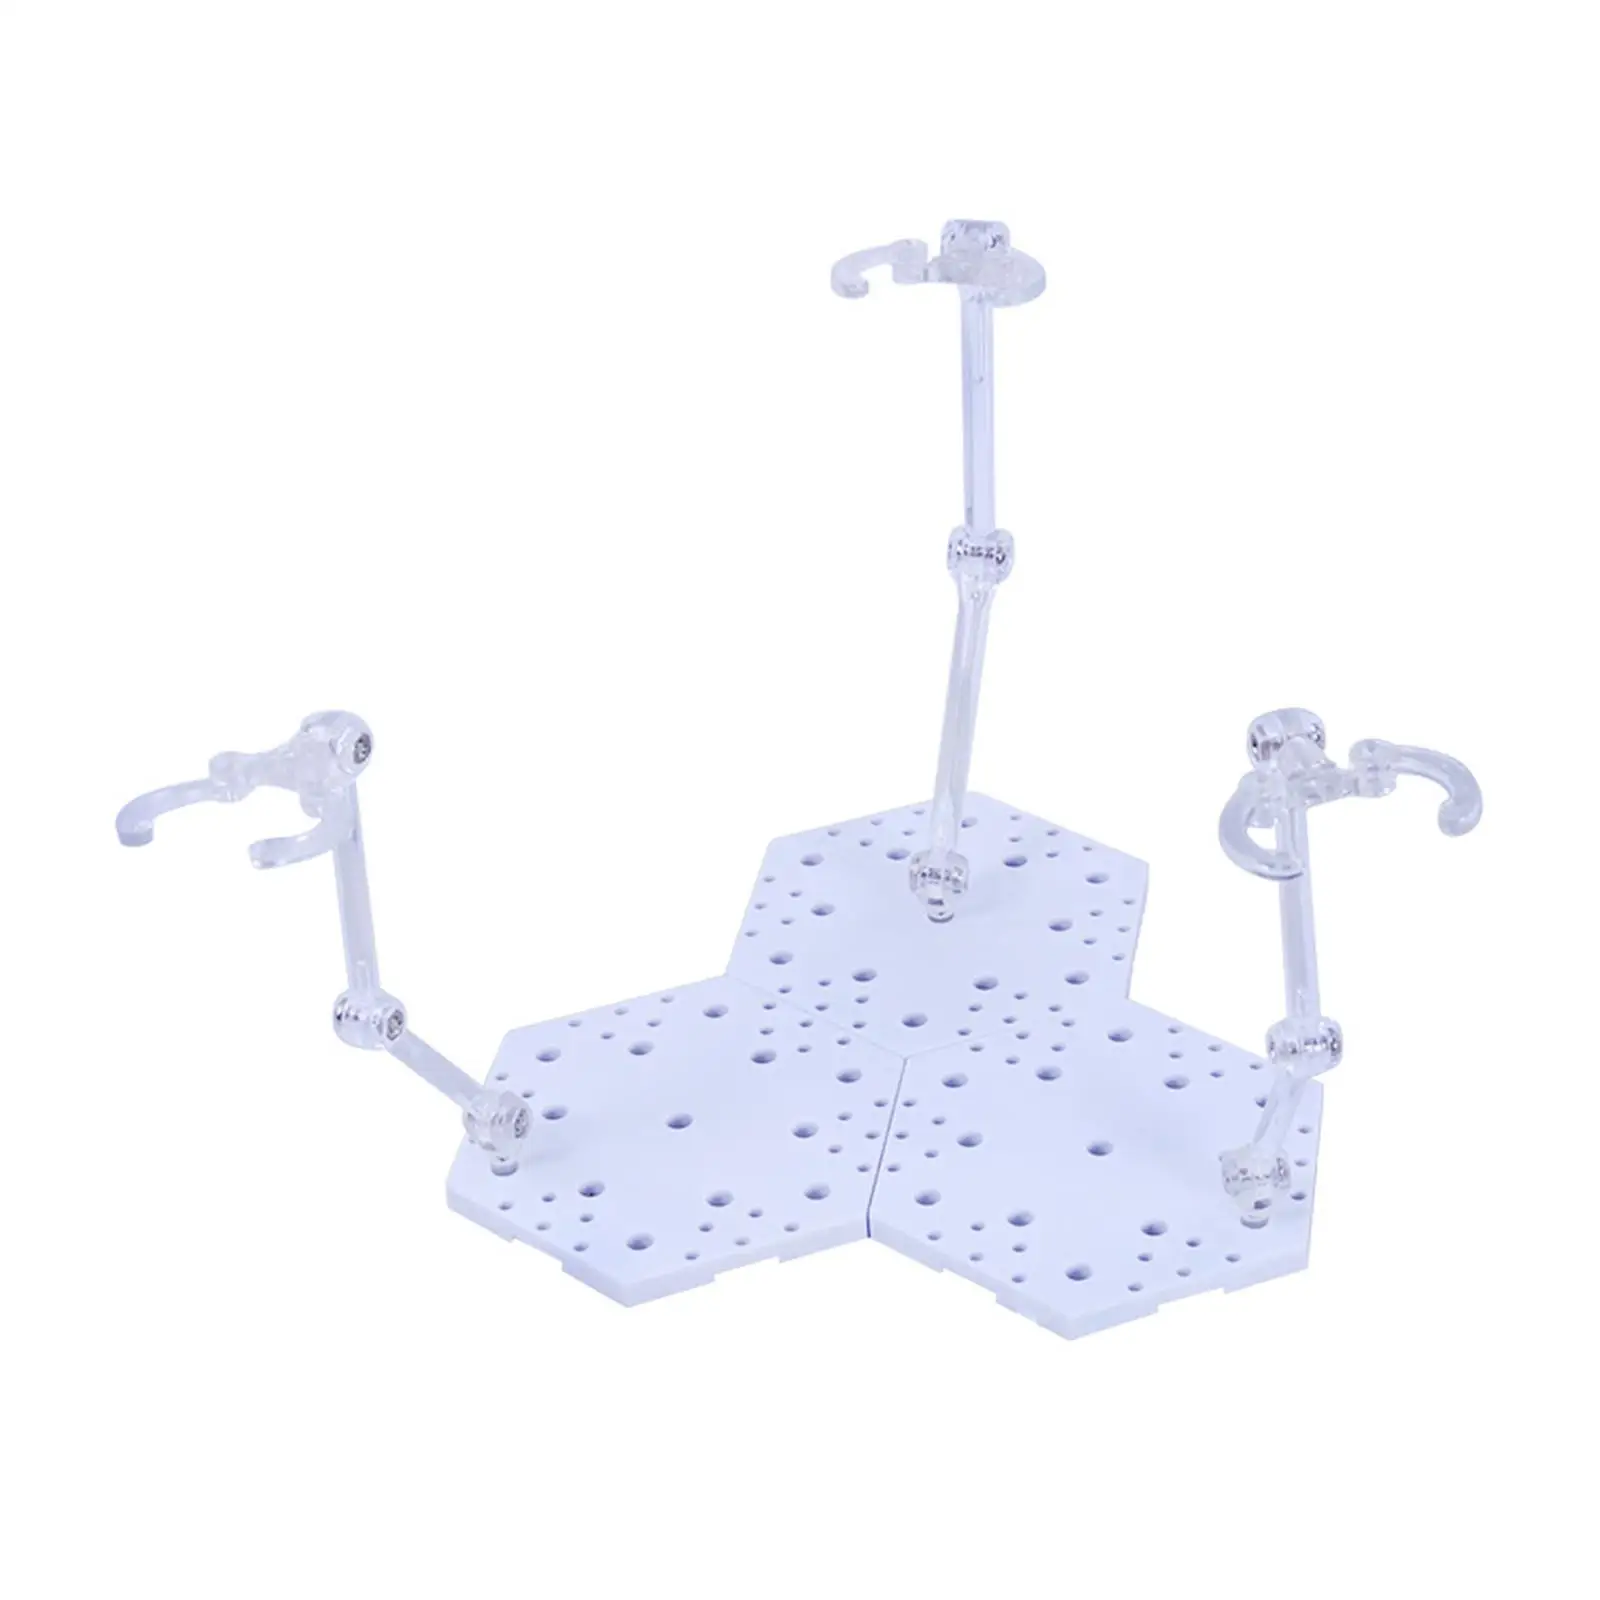 Sturdy Action Figure Base Support Rack Stand Bracket Holder for Doll Model Toys DIY Accessories